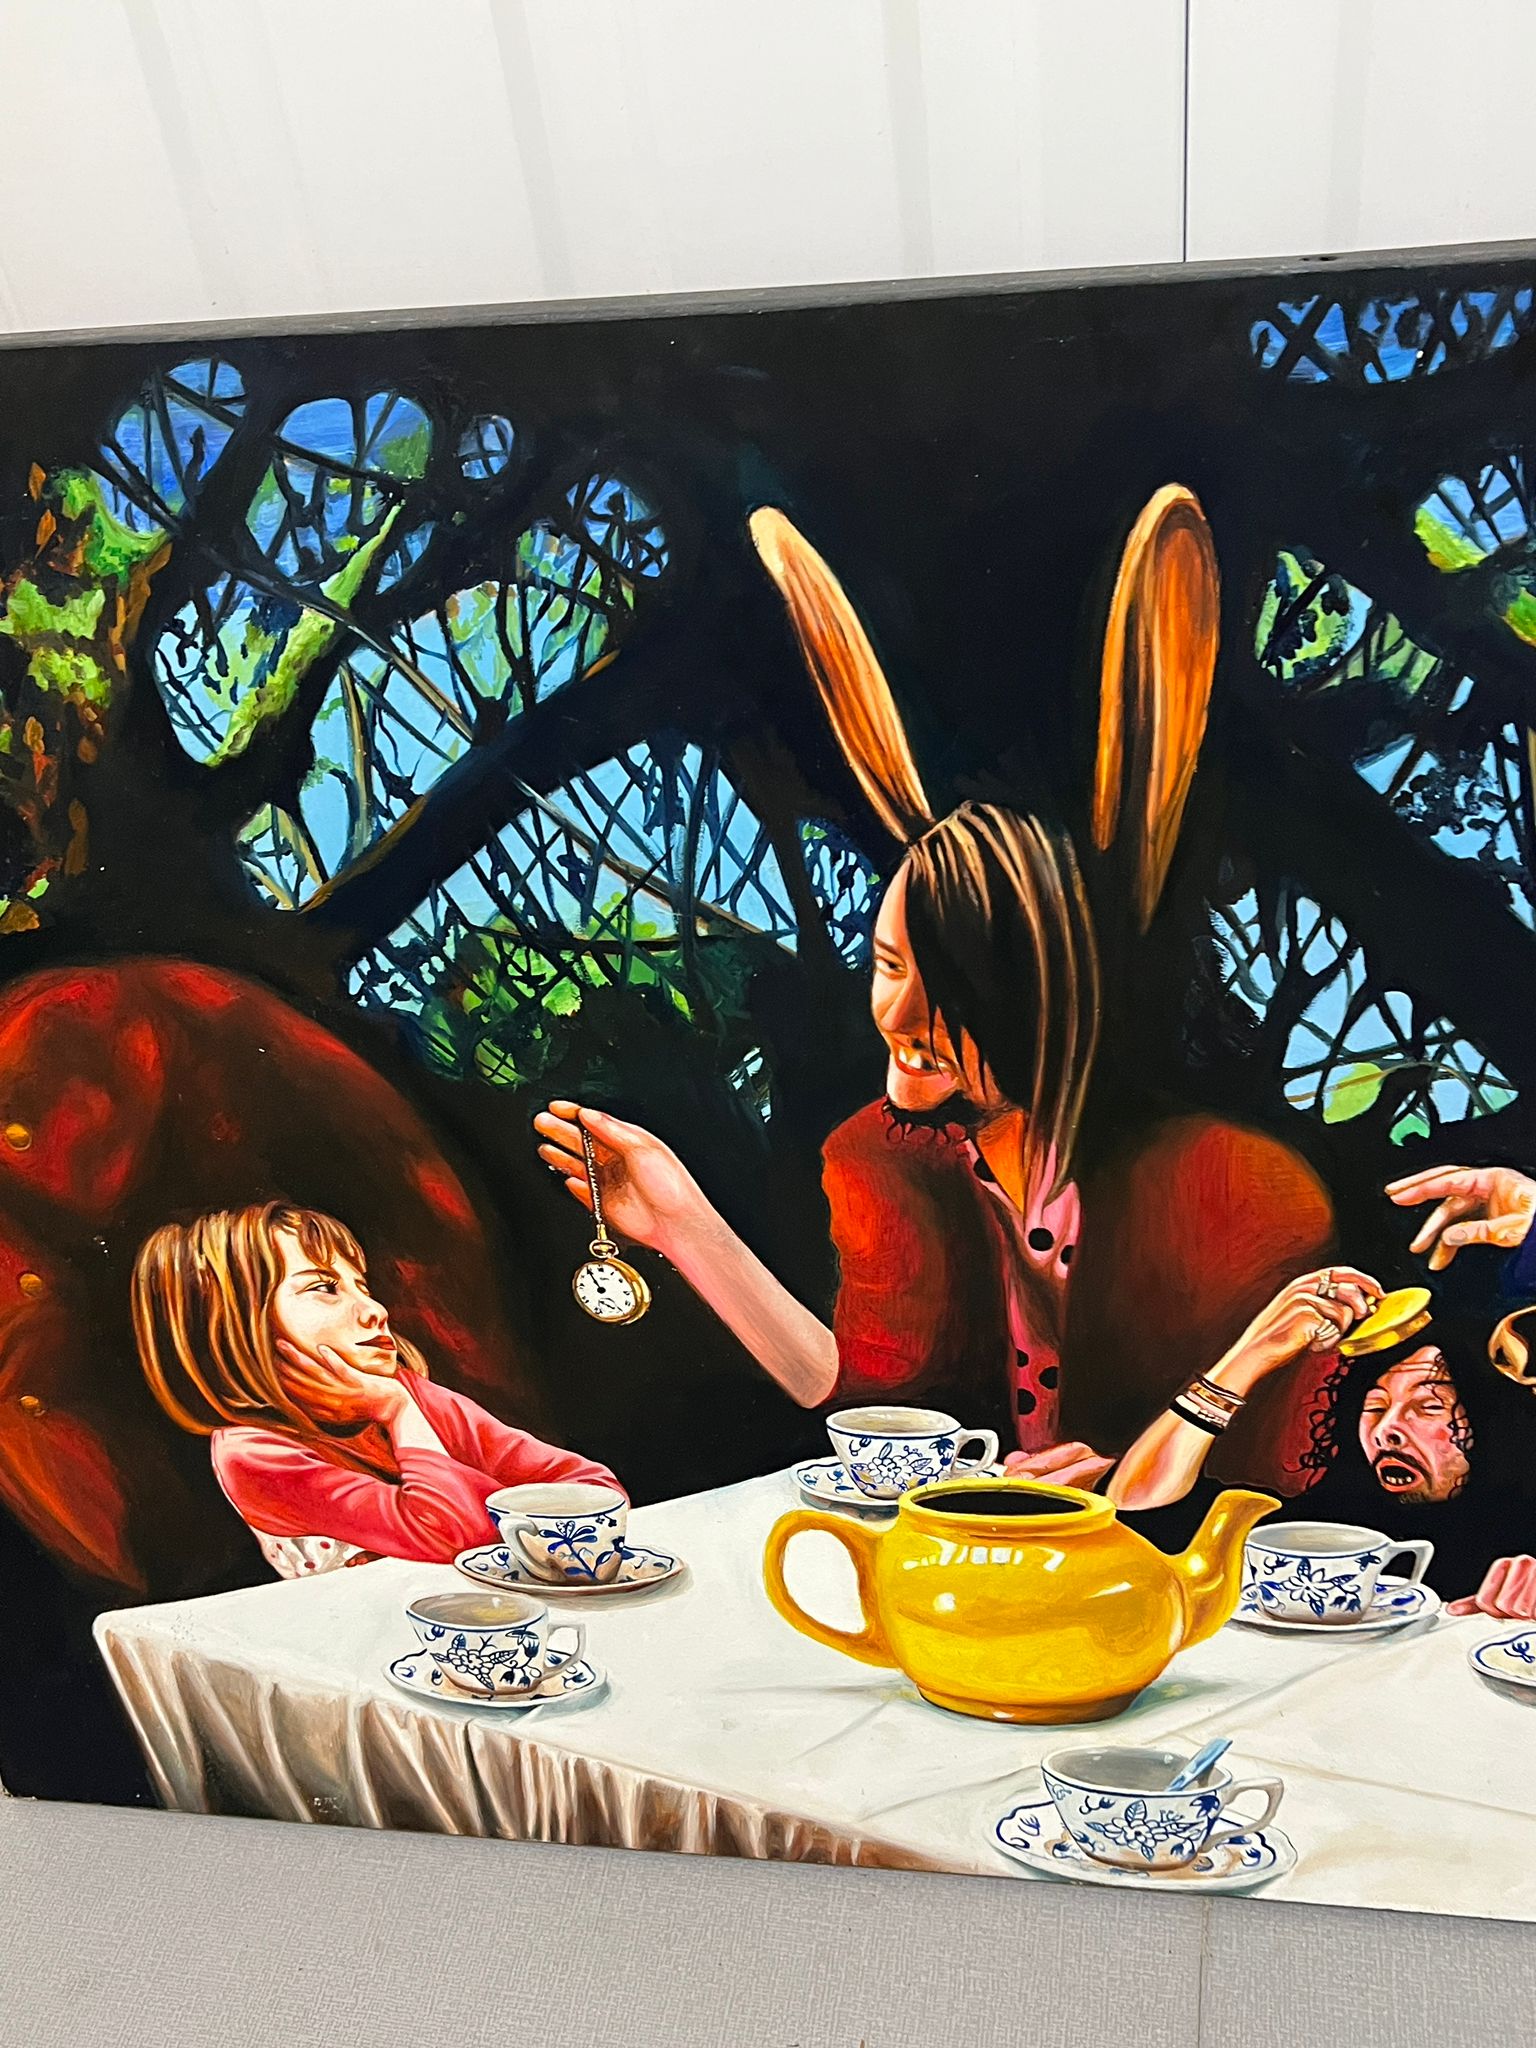 Neil Thomas Roberts 'Little Alice & a band of peculiar fellows' oil on wood 100cm x 70cm (2006) - Image 4 of 5